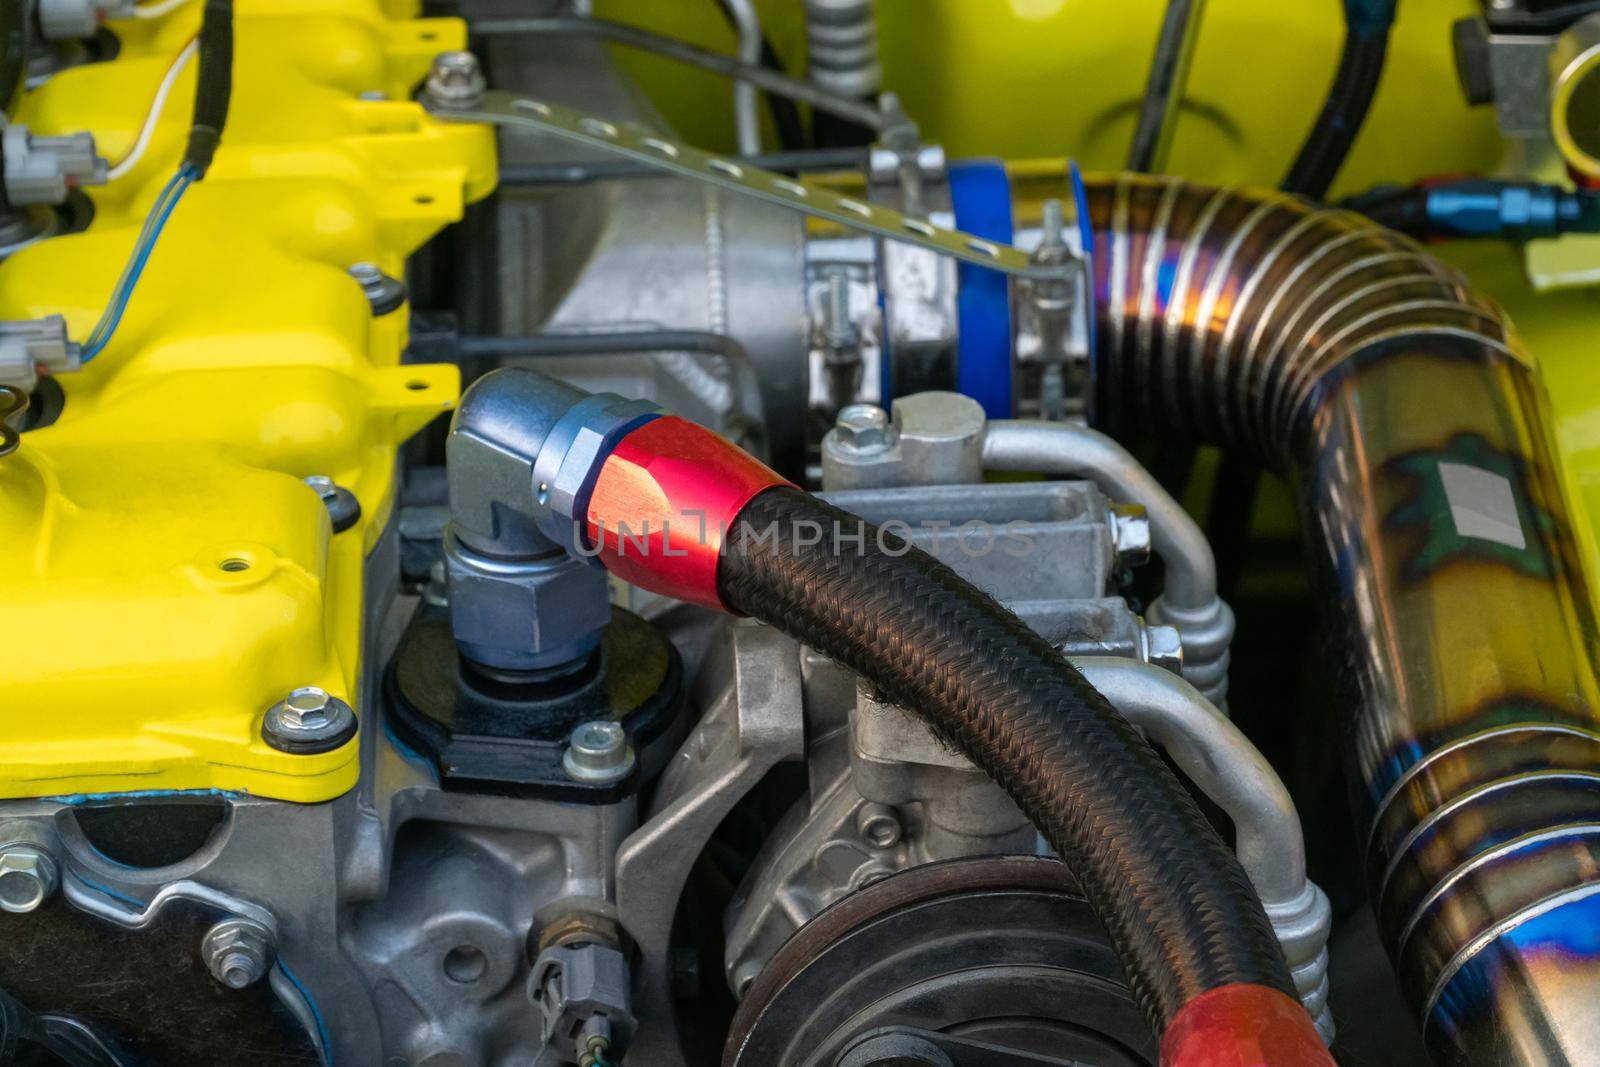 Double braided nylon Hose and fittings on diesel racing car